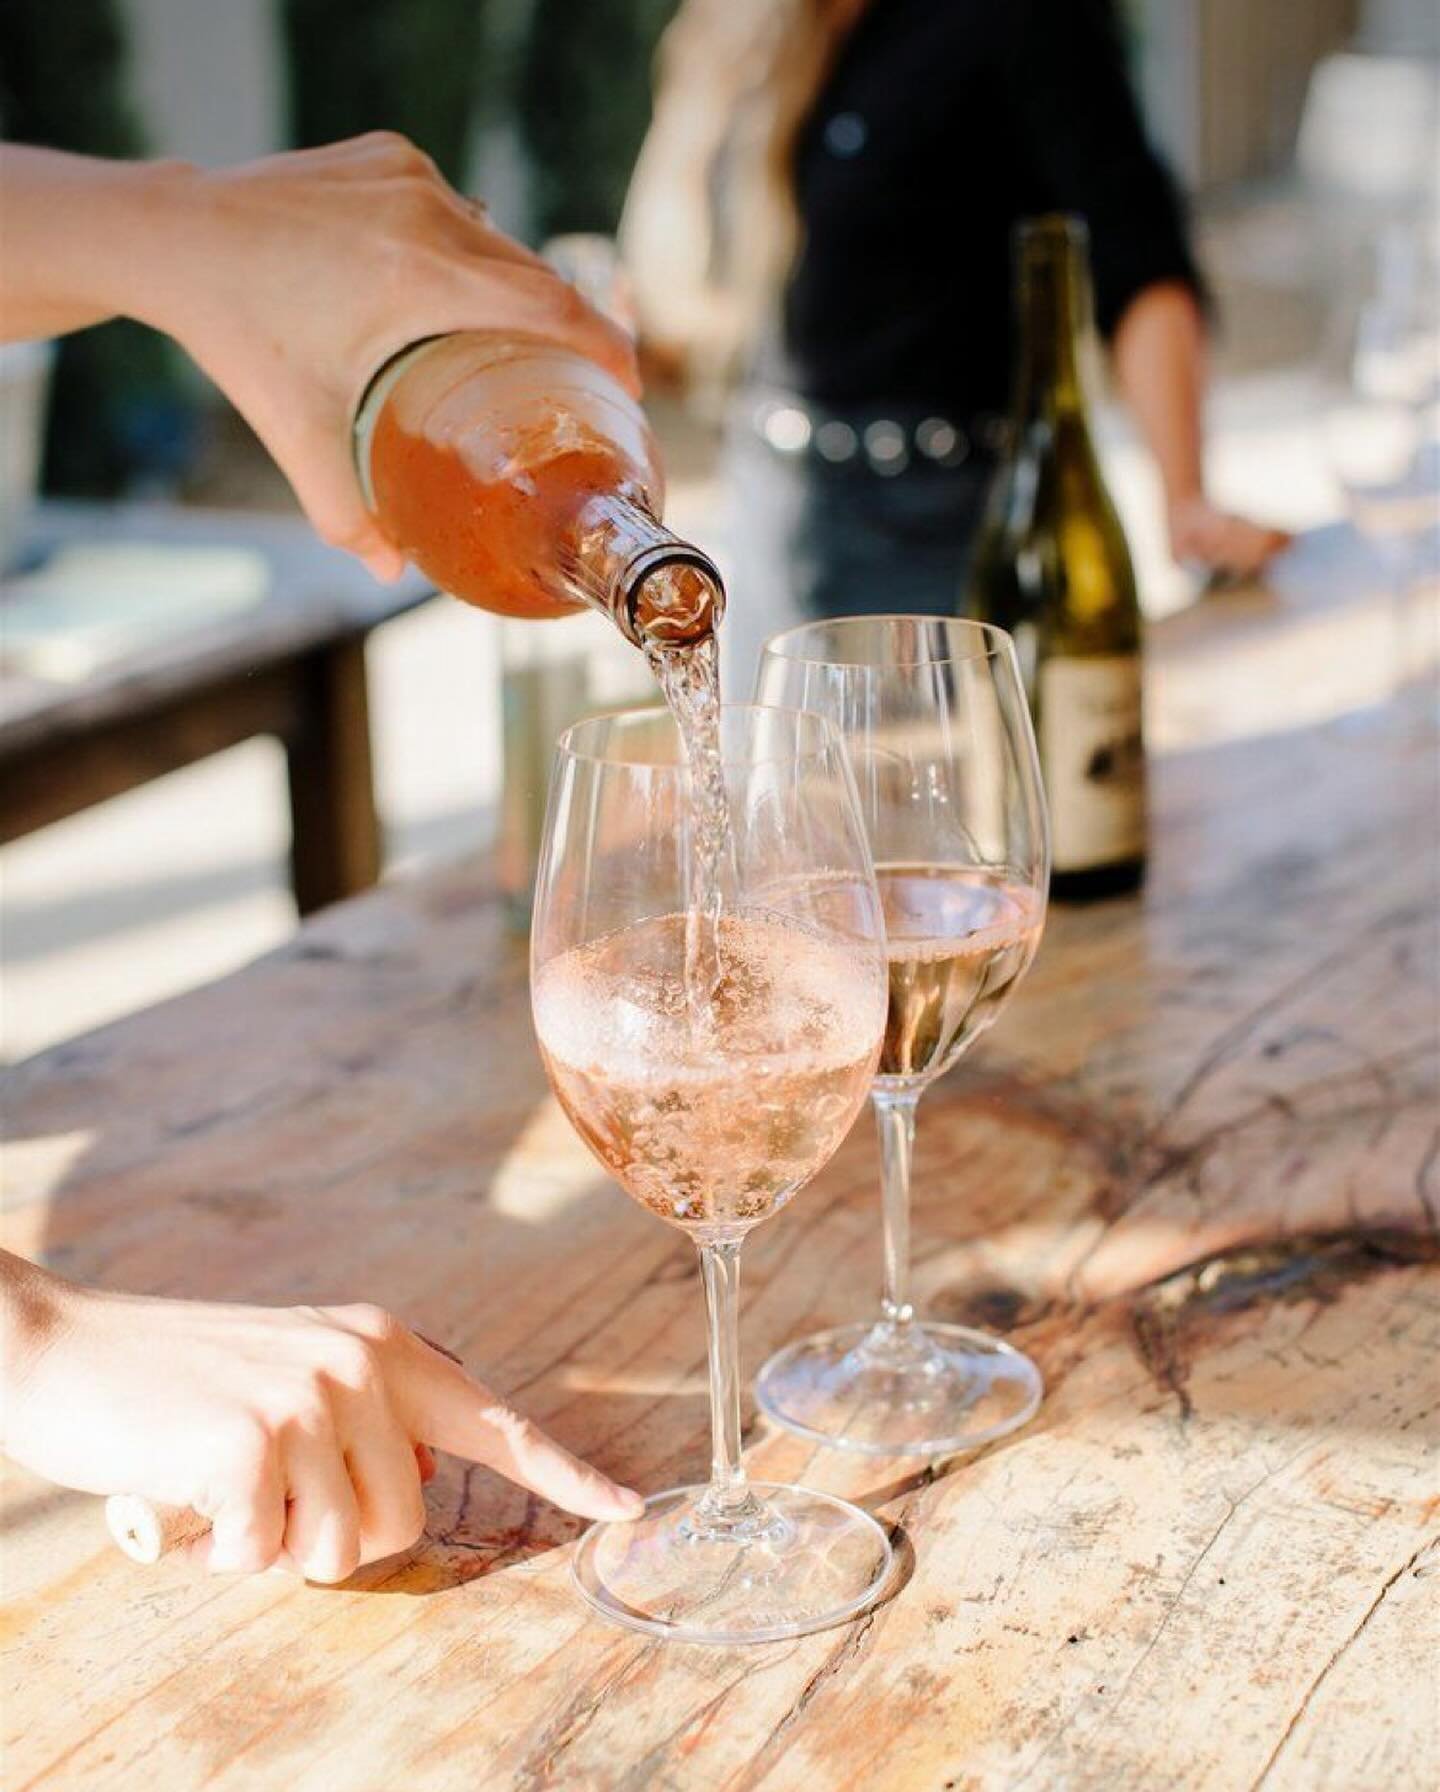 🌸ROS&Eacute; DINNER IS LIVE!🌸

Spring is in the air, and we are excited to celebrate everyone&rsquo;s favorite pink drink! This is THE LAST Wine Dinner of the season! (Don&rsquo;t worry, our Wine Dinner series will return in the Fall)

5 Delicious 